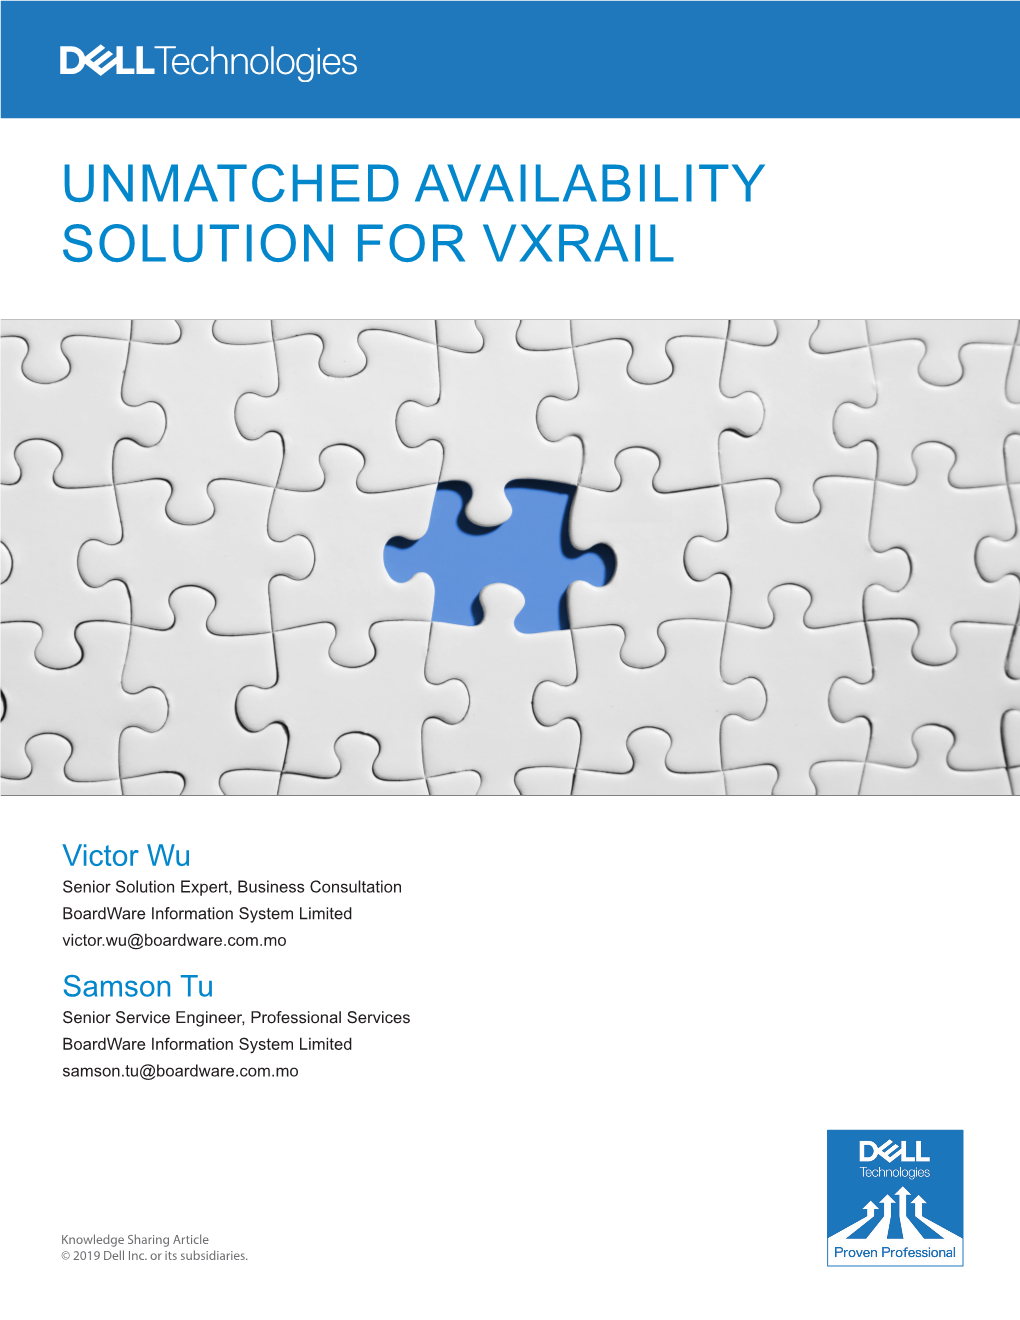 Unmatched Availability Solution for Vxrail